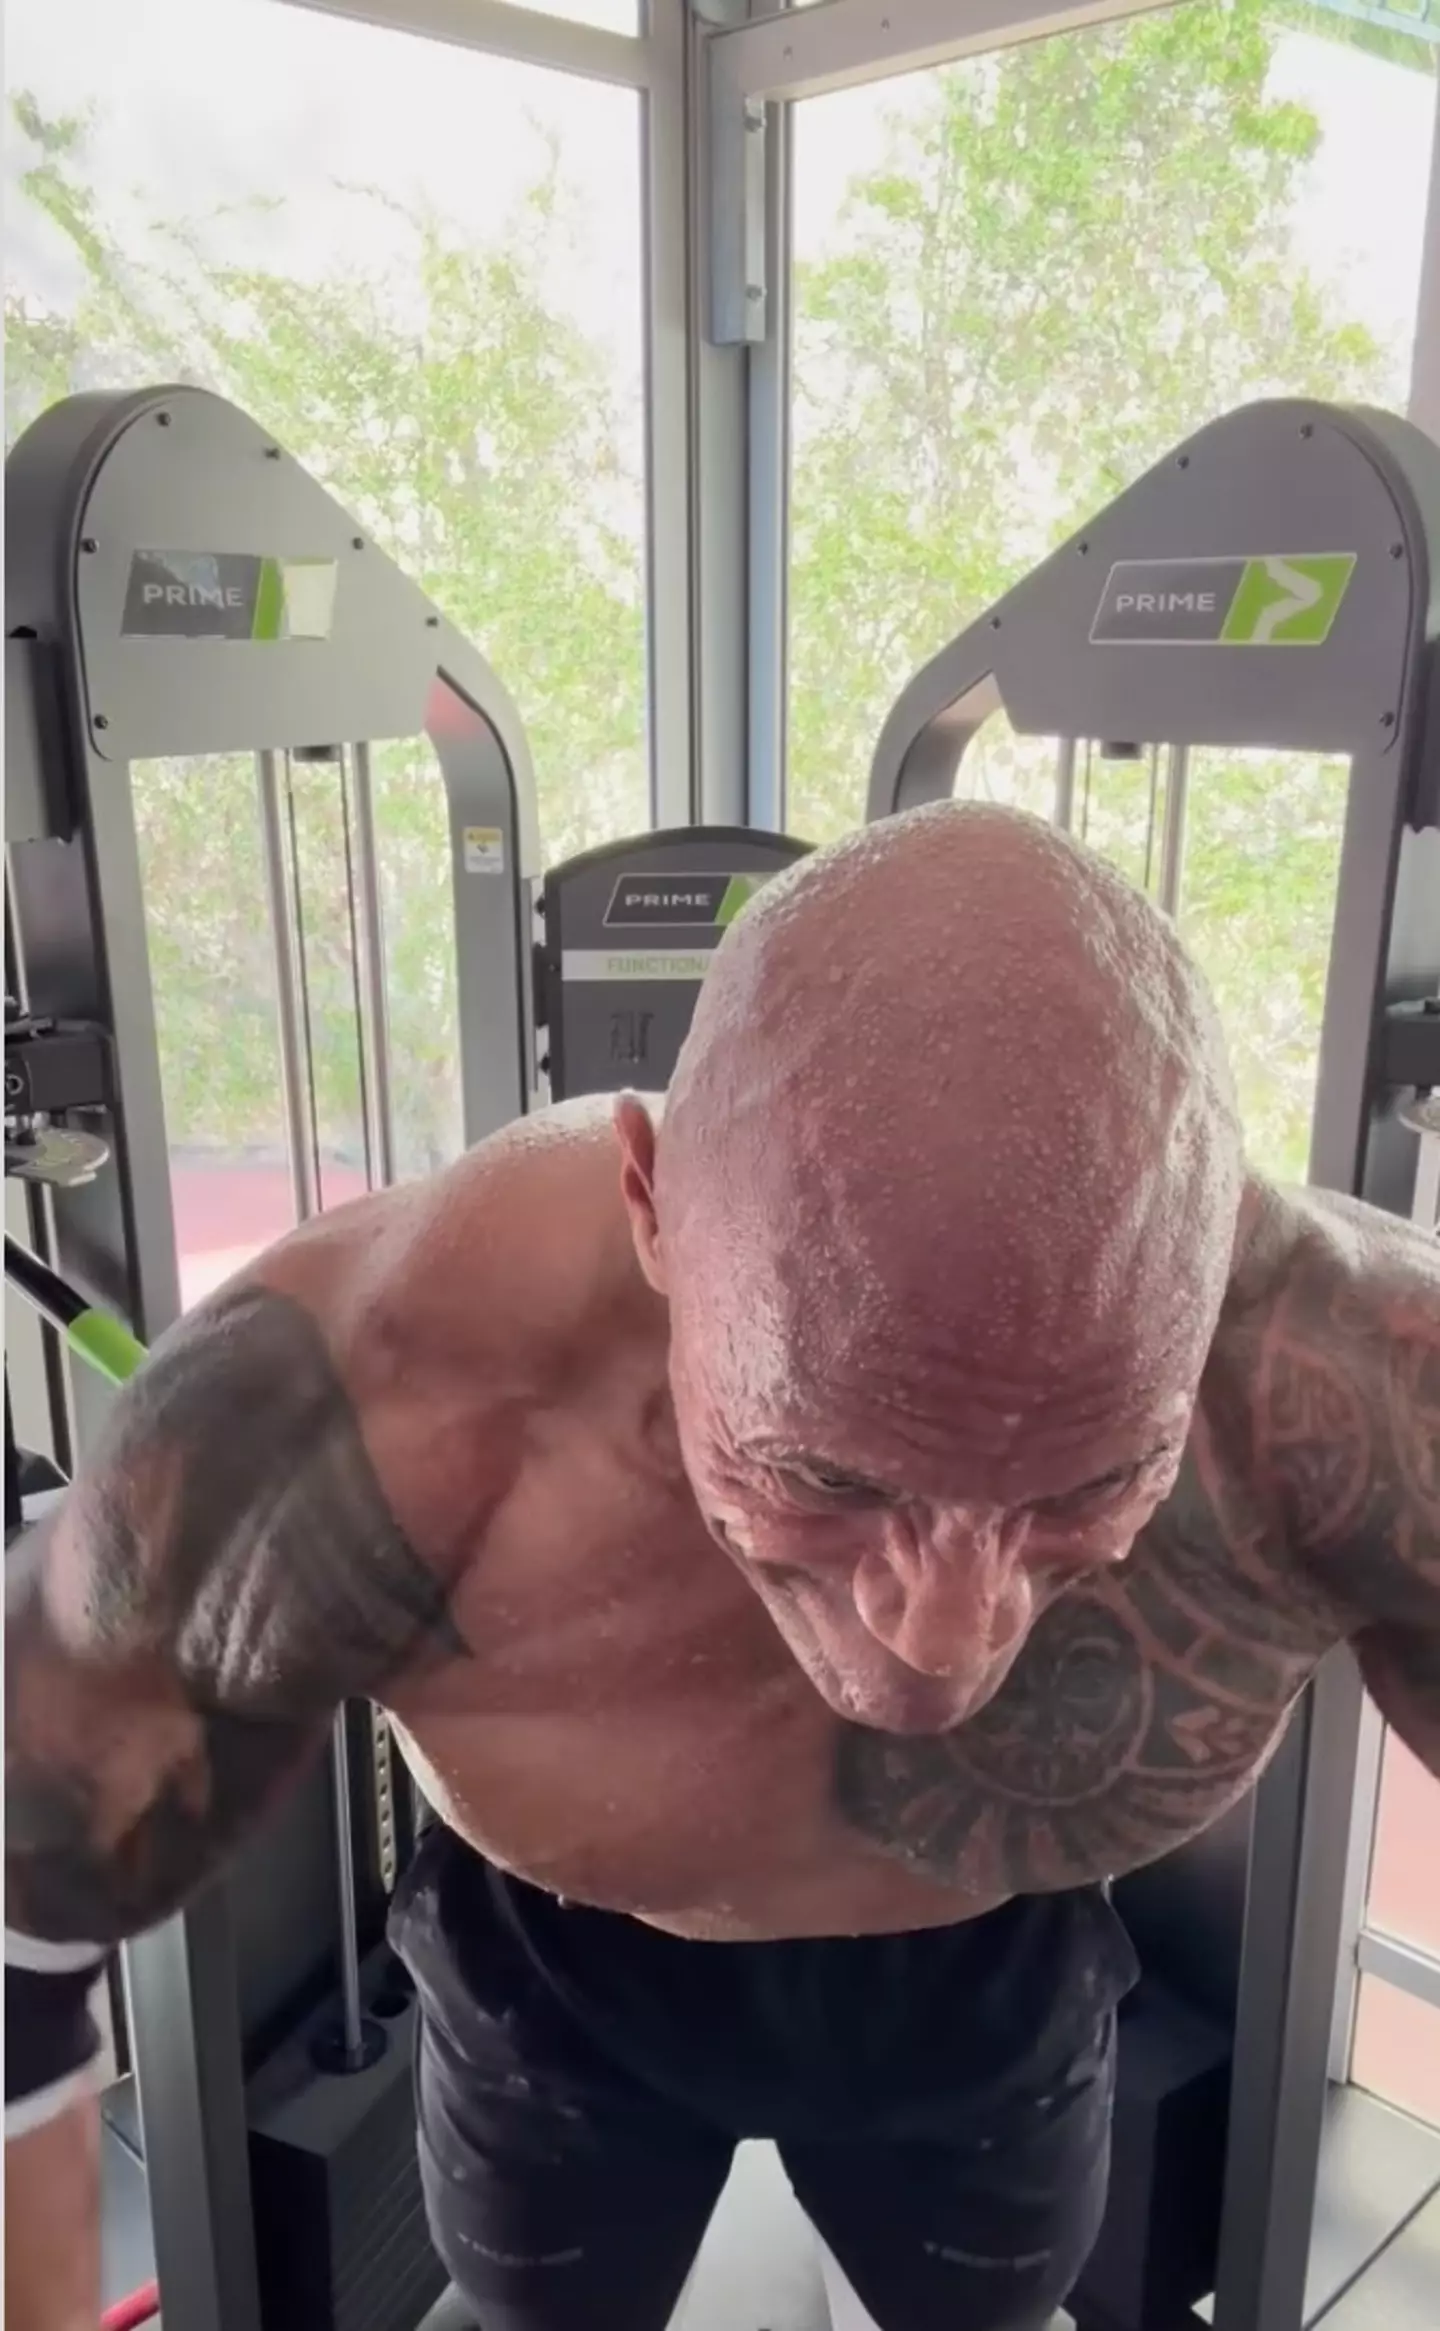 Social media users couldn't believe how much sweat The Rock produced.